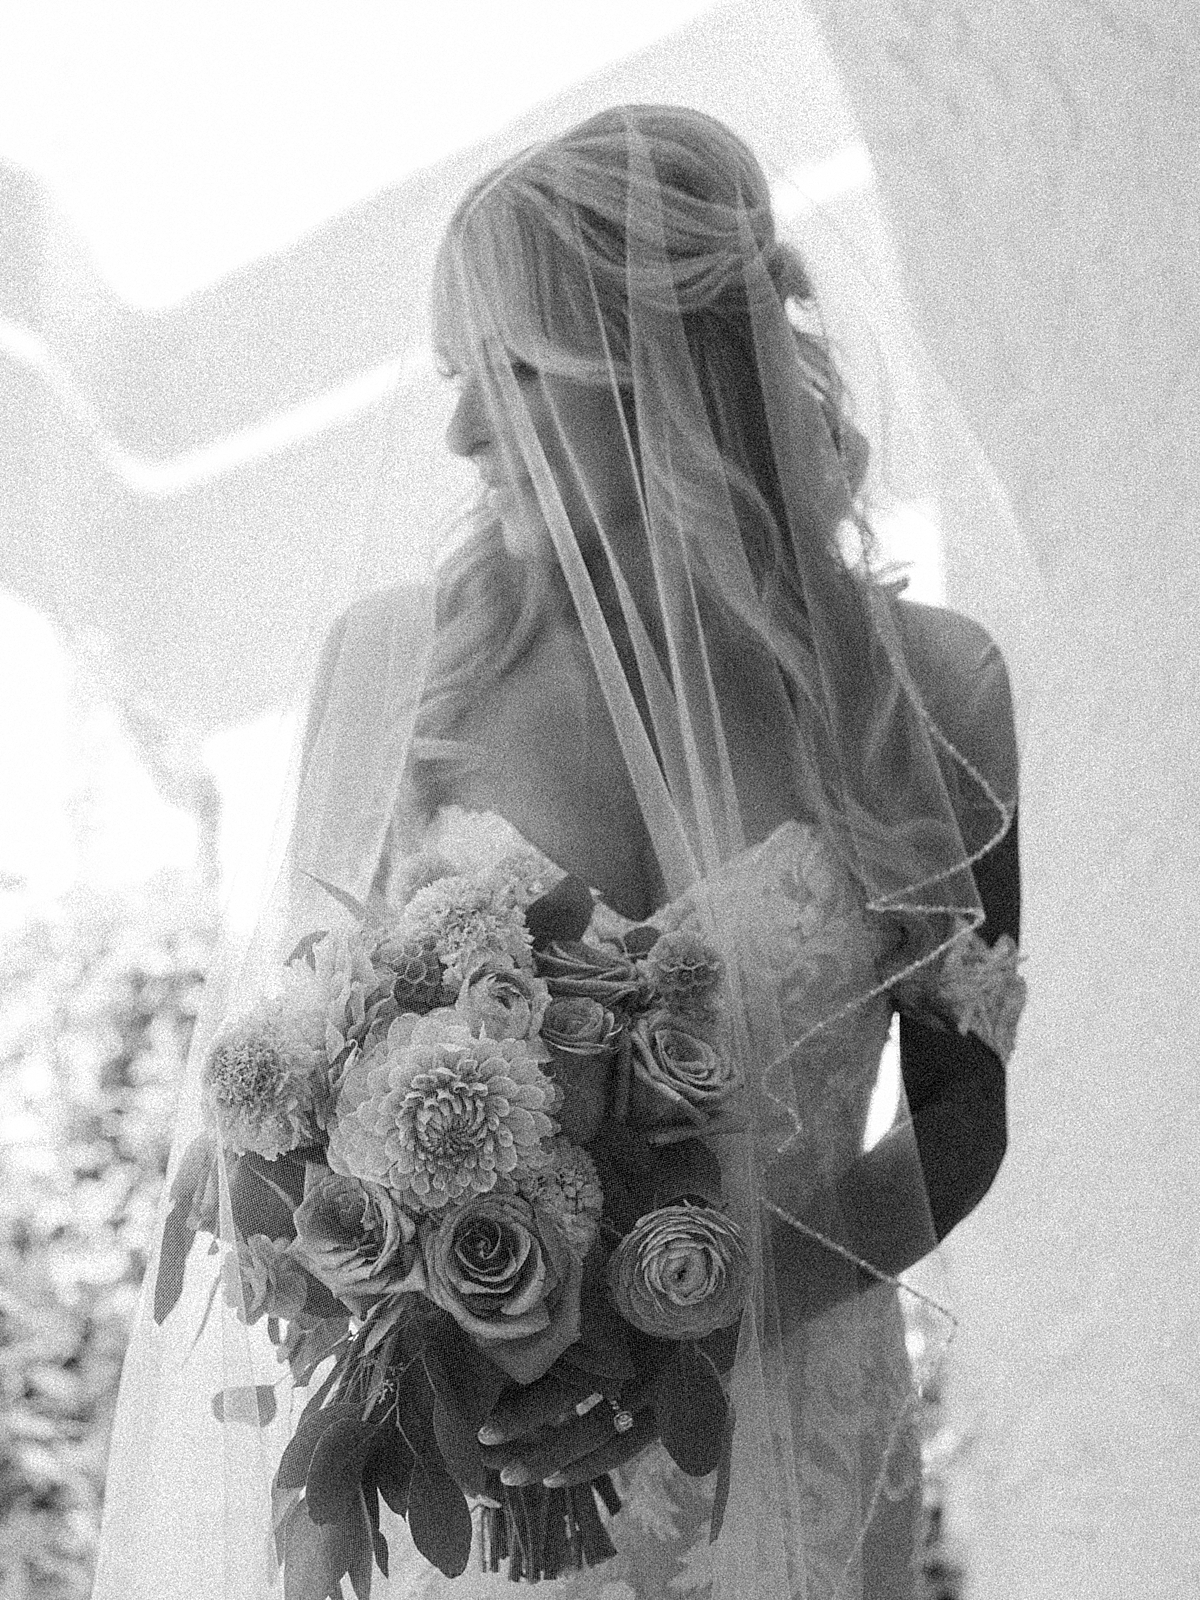 slightly out of focus black and white of a bride under a veil